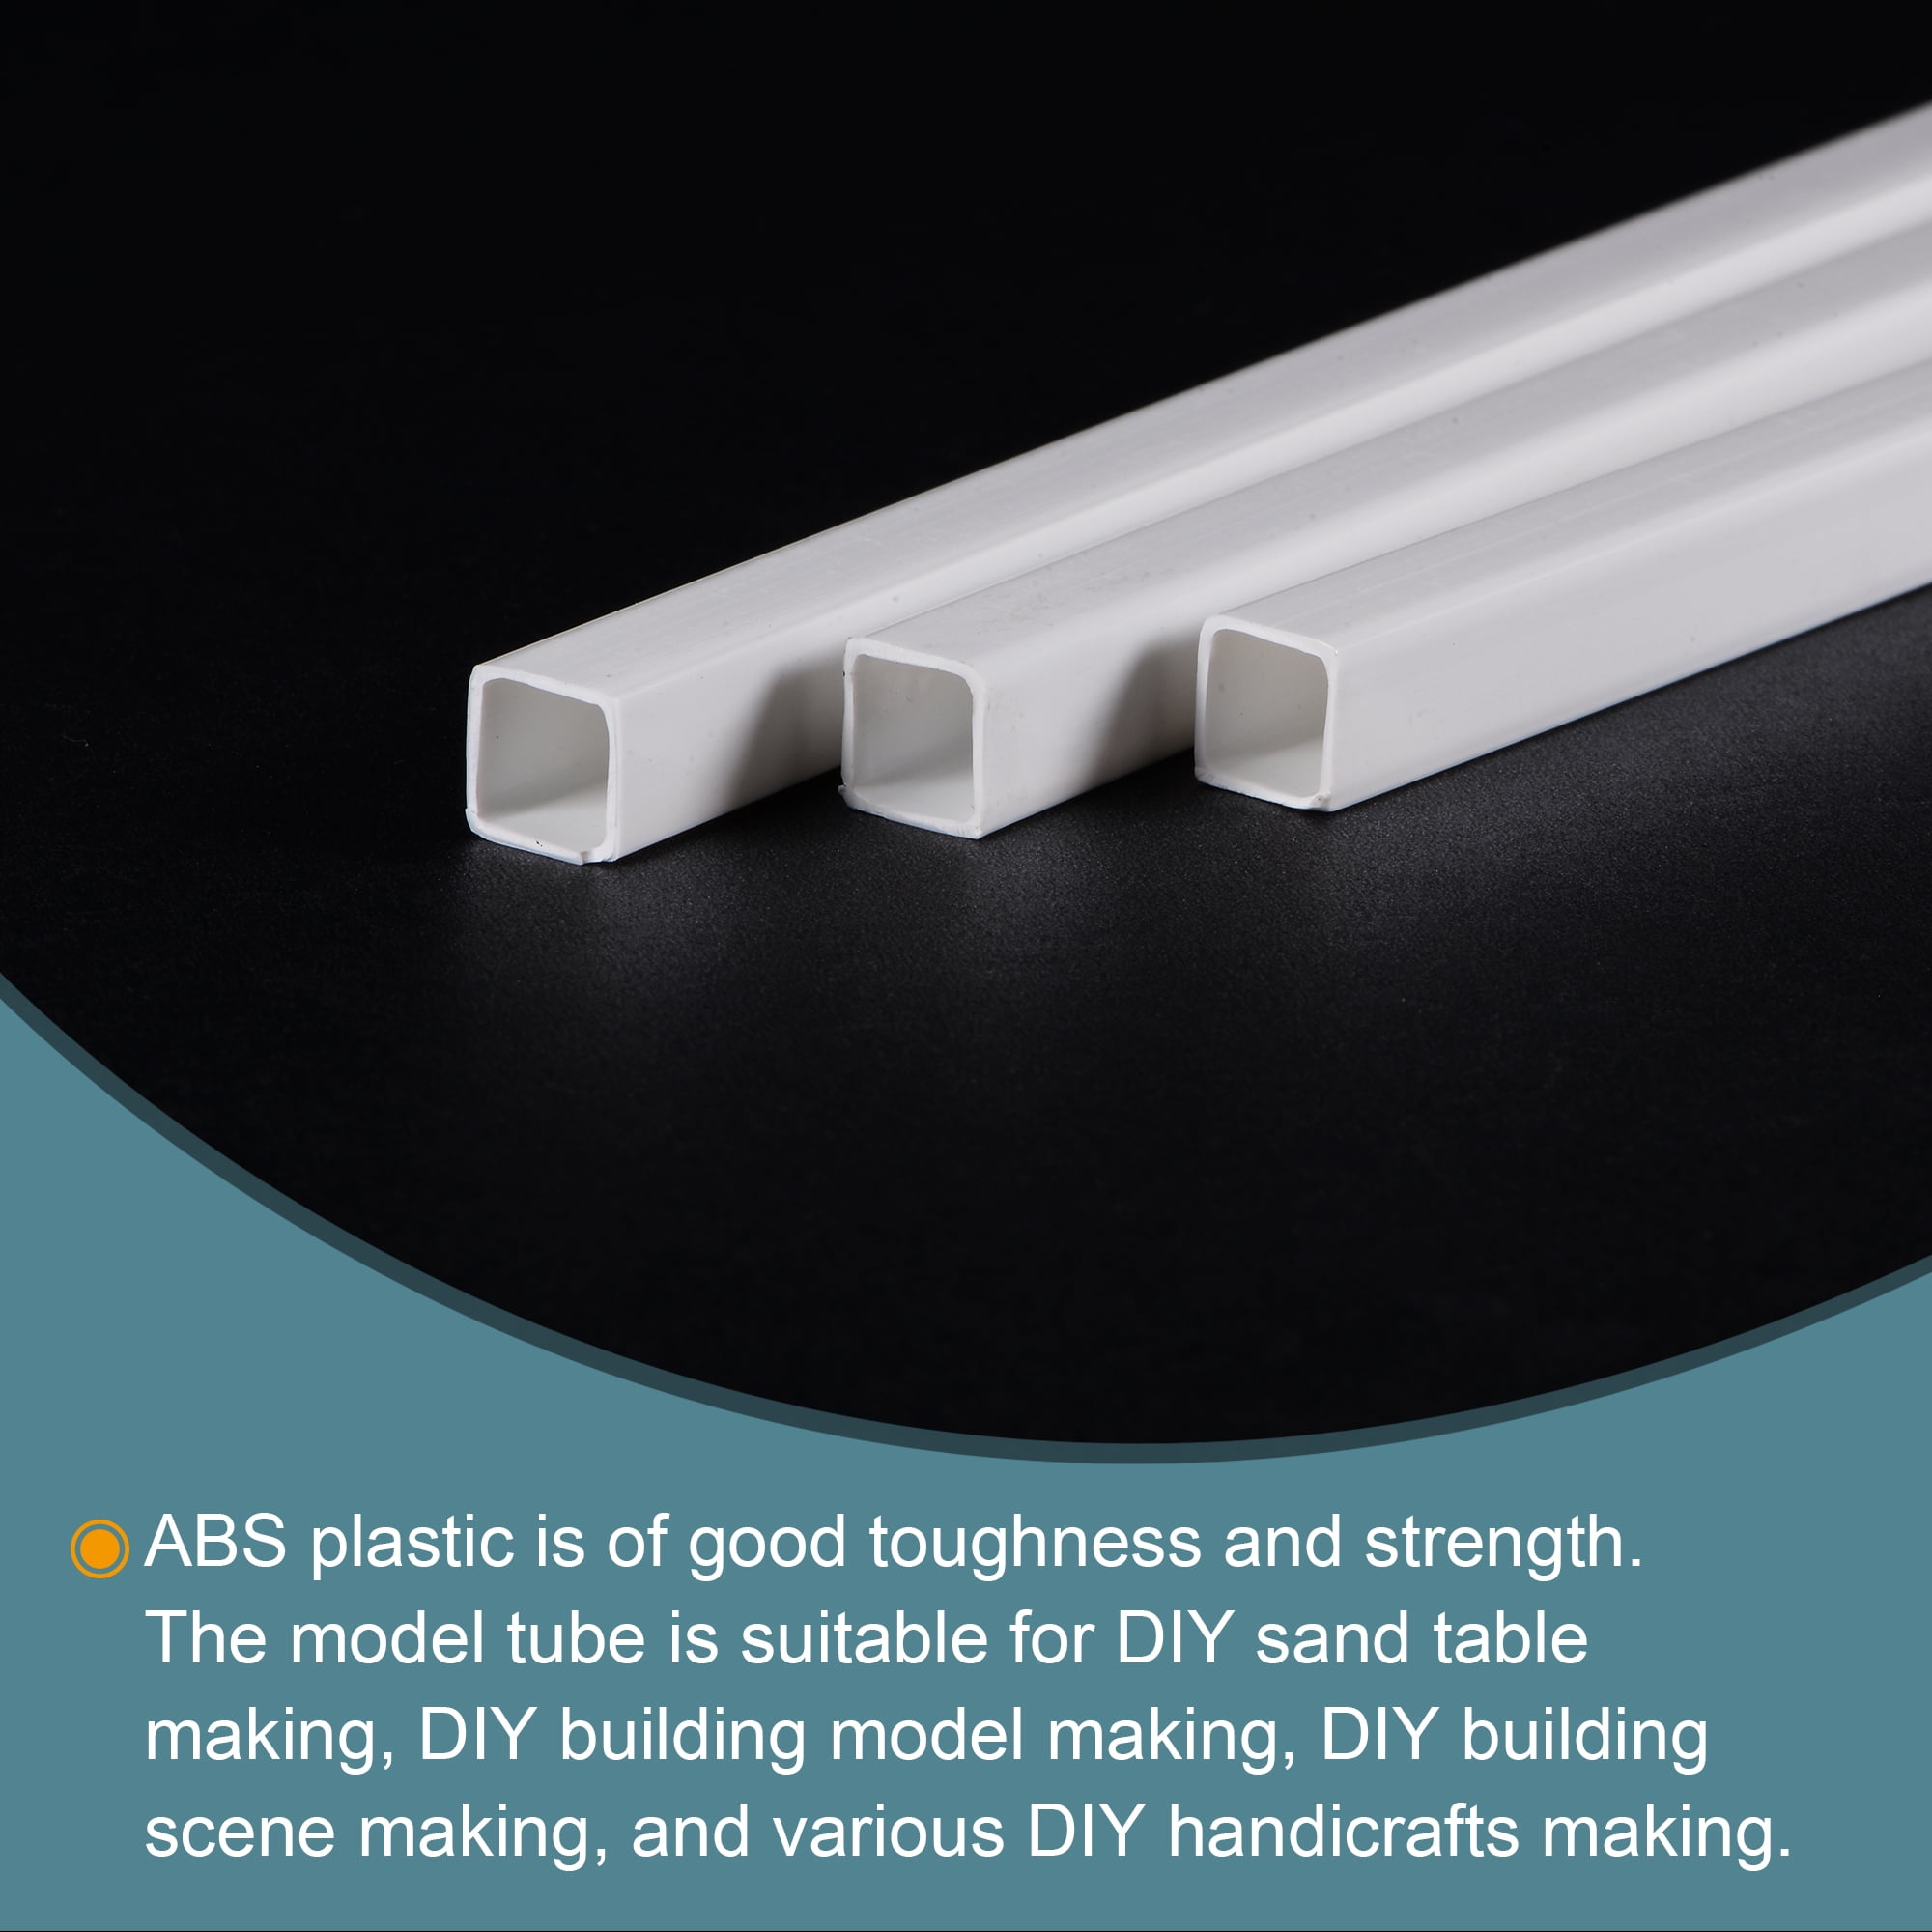 uxcell 4pcs ABS Plastic Square Bars Rod 5mm×5mm×20 inch ABS Plastic Square Bar Rod for Architectural Model Making DIY White 